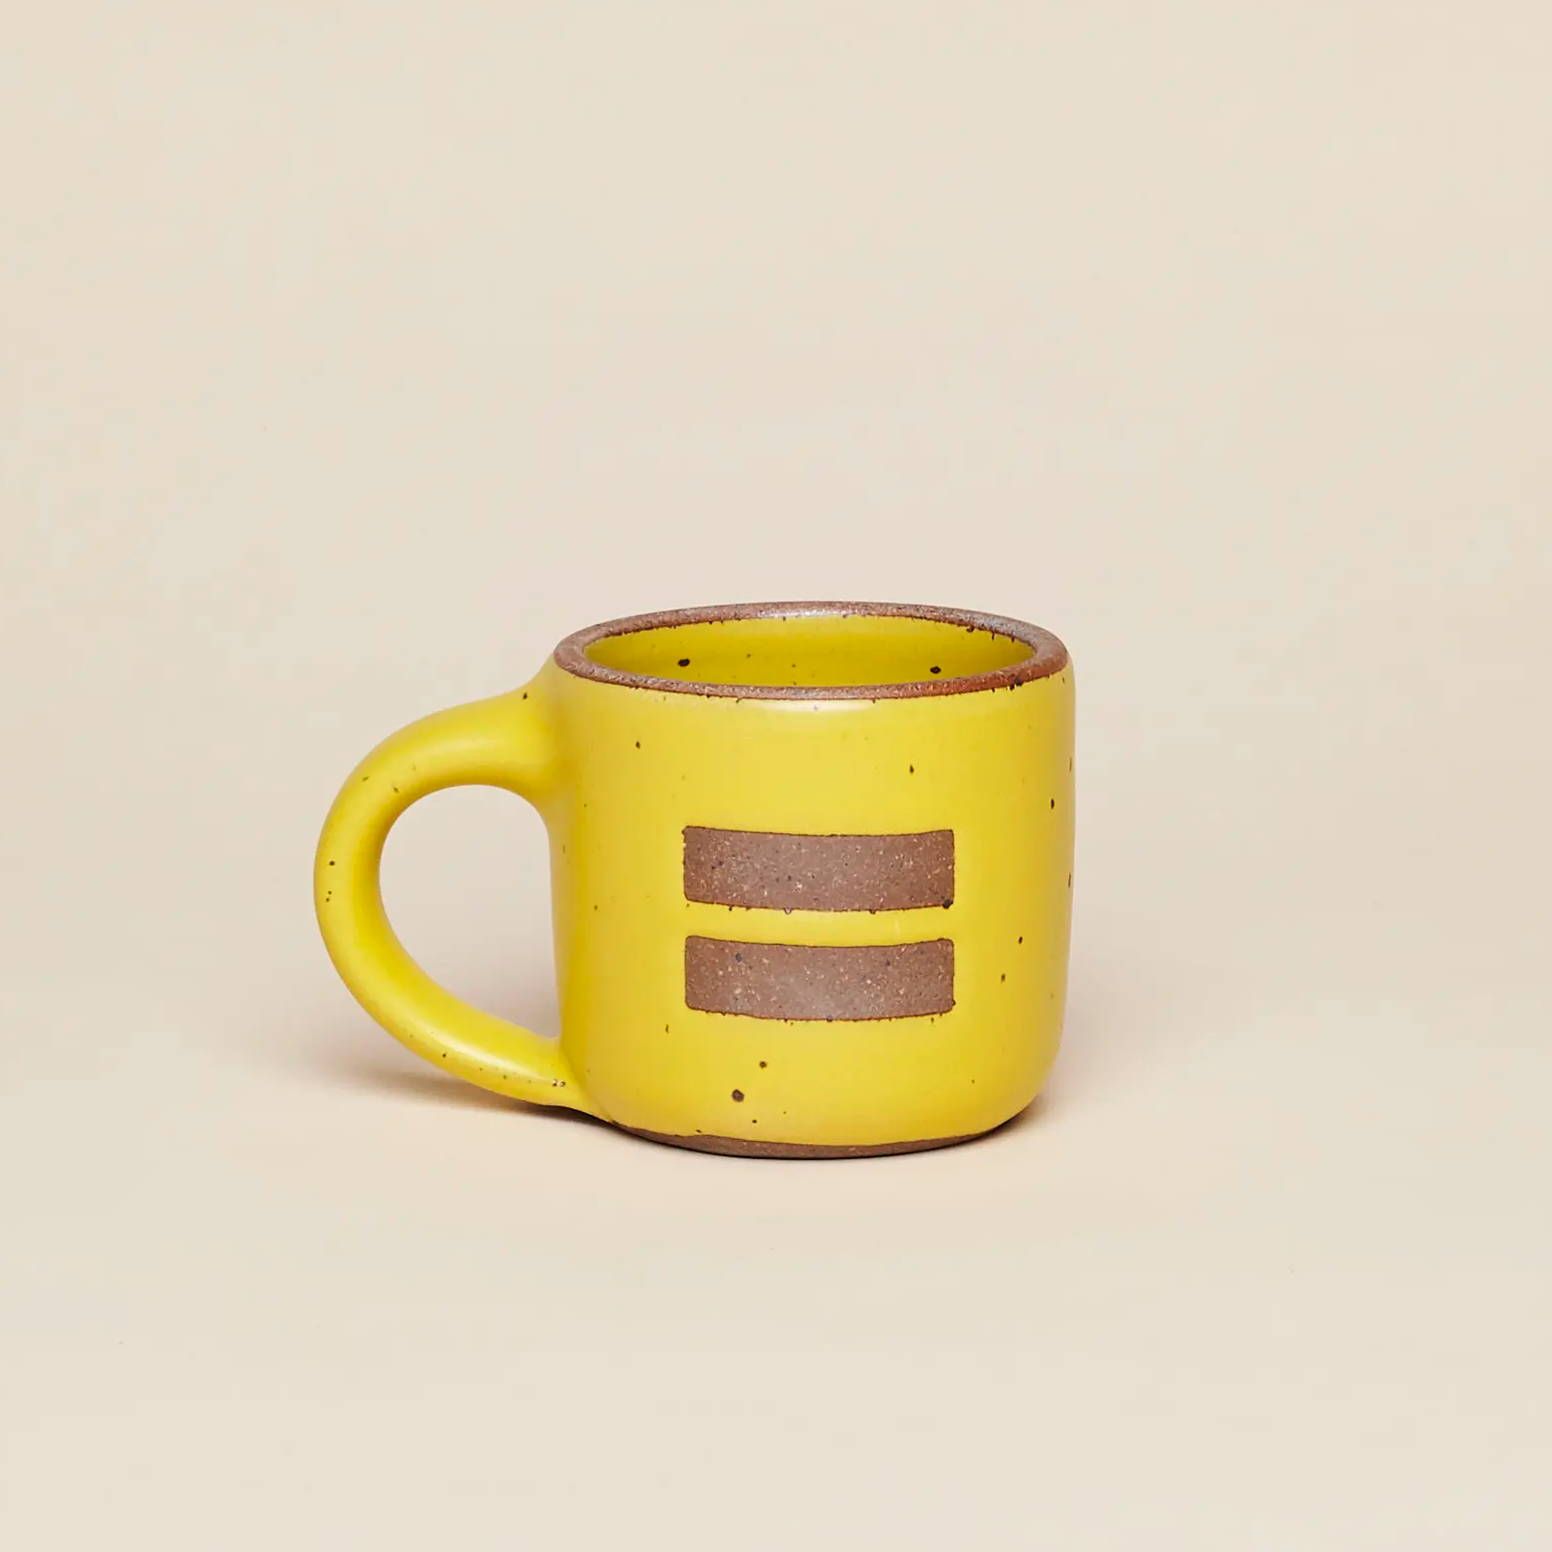 Small Equality Mug in Pollen